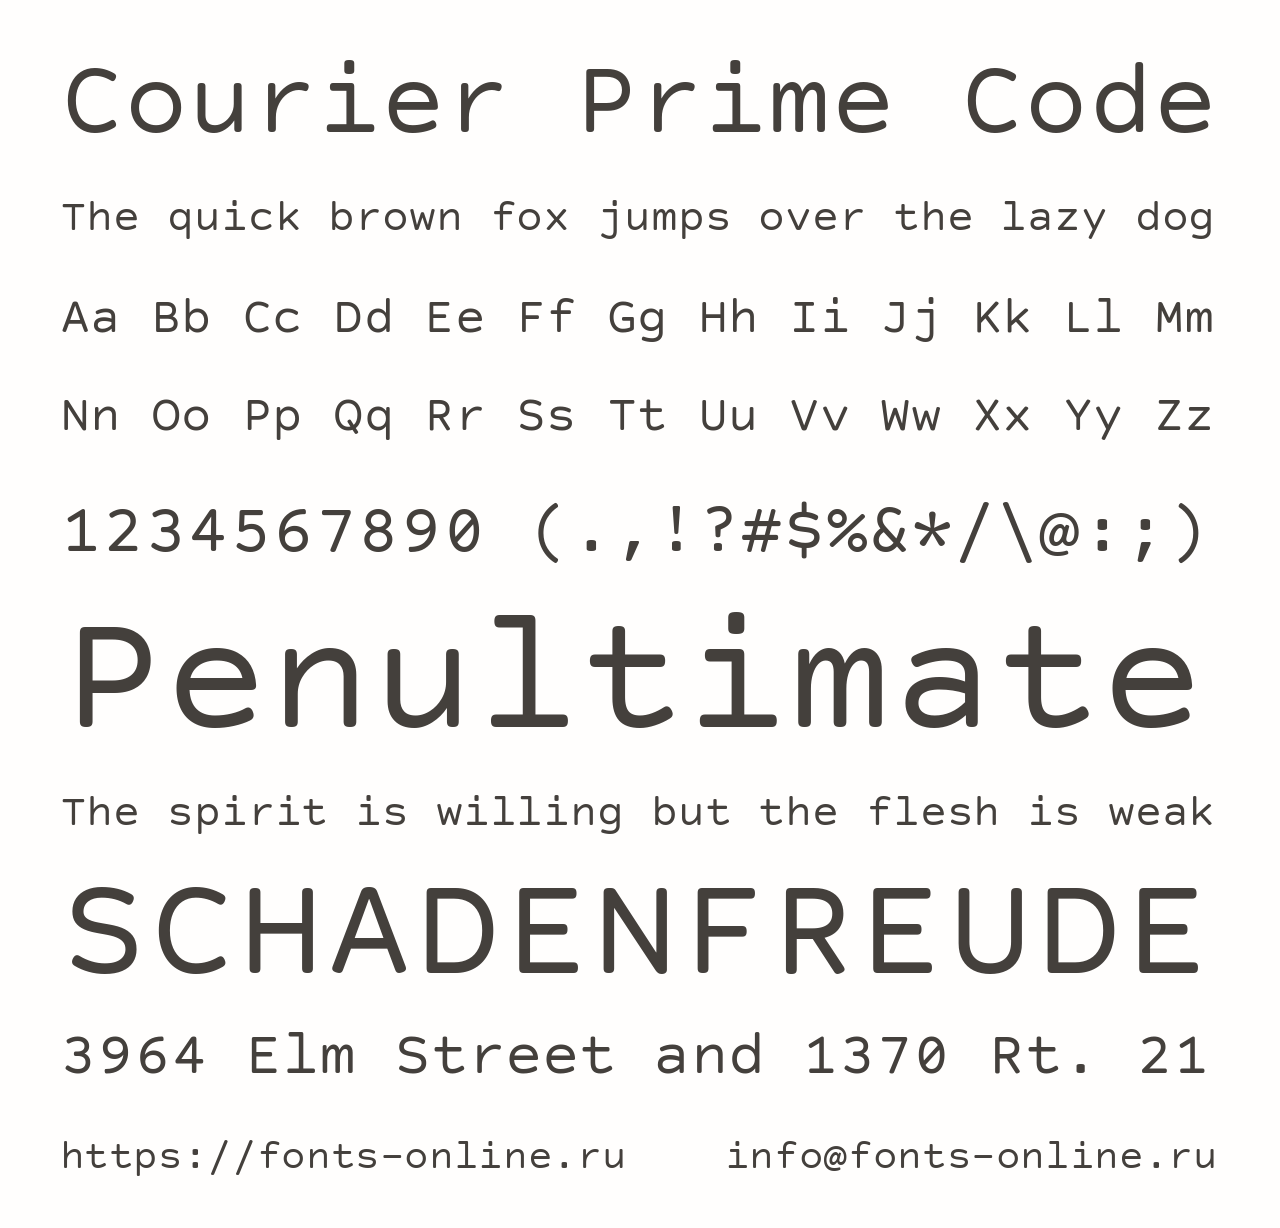 Шрифт Courier Prime Code